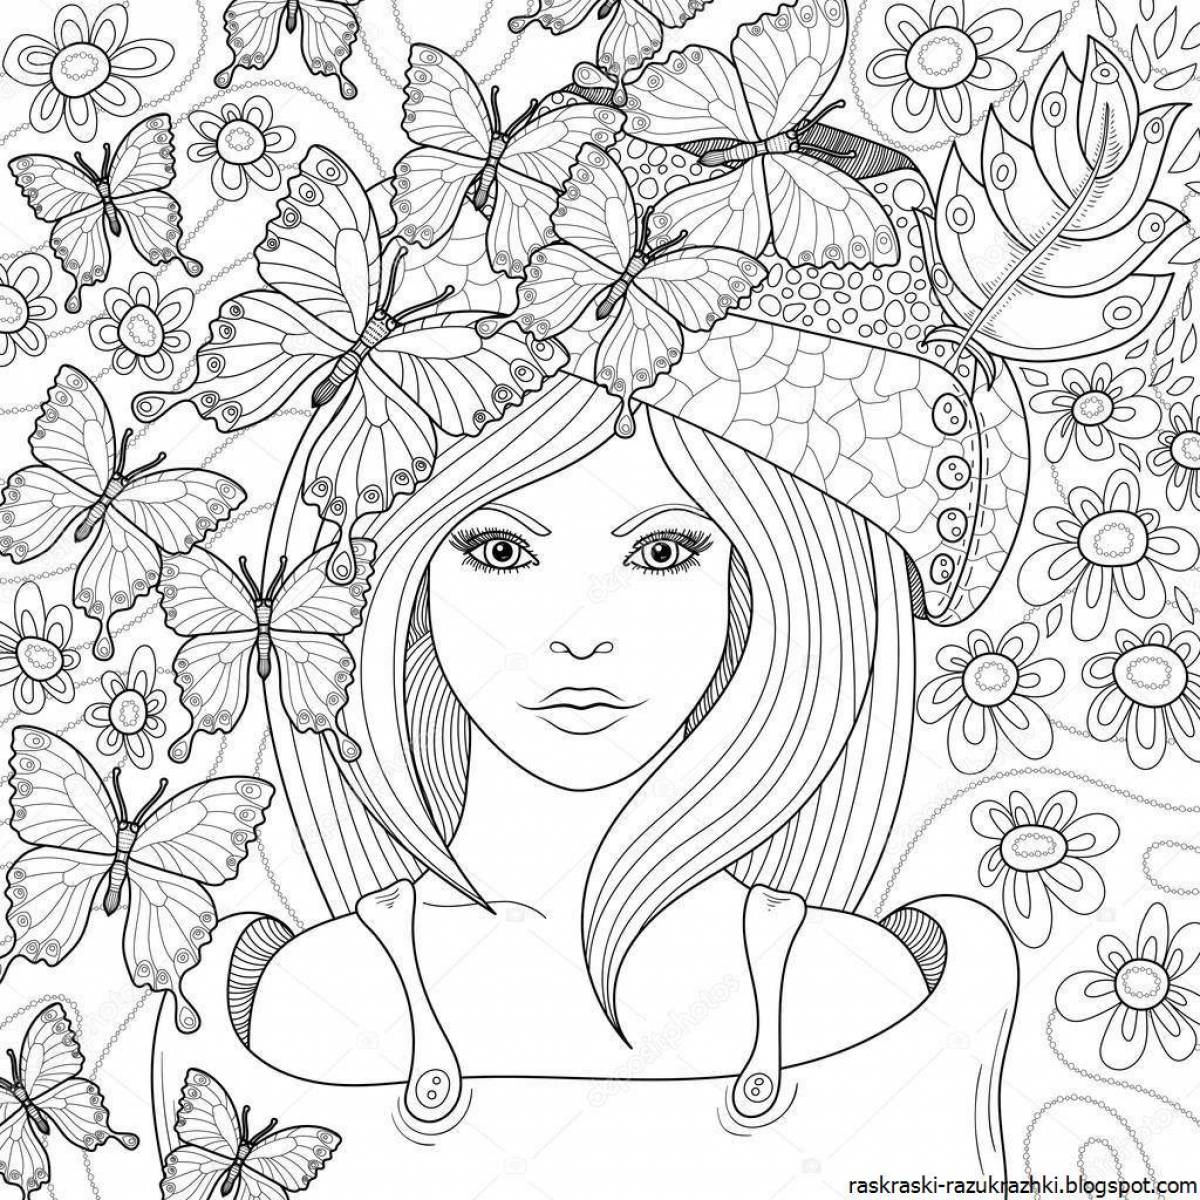 Fascinating coloring beautiful page